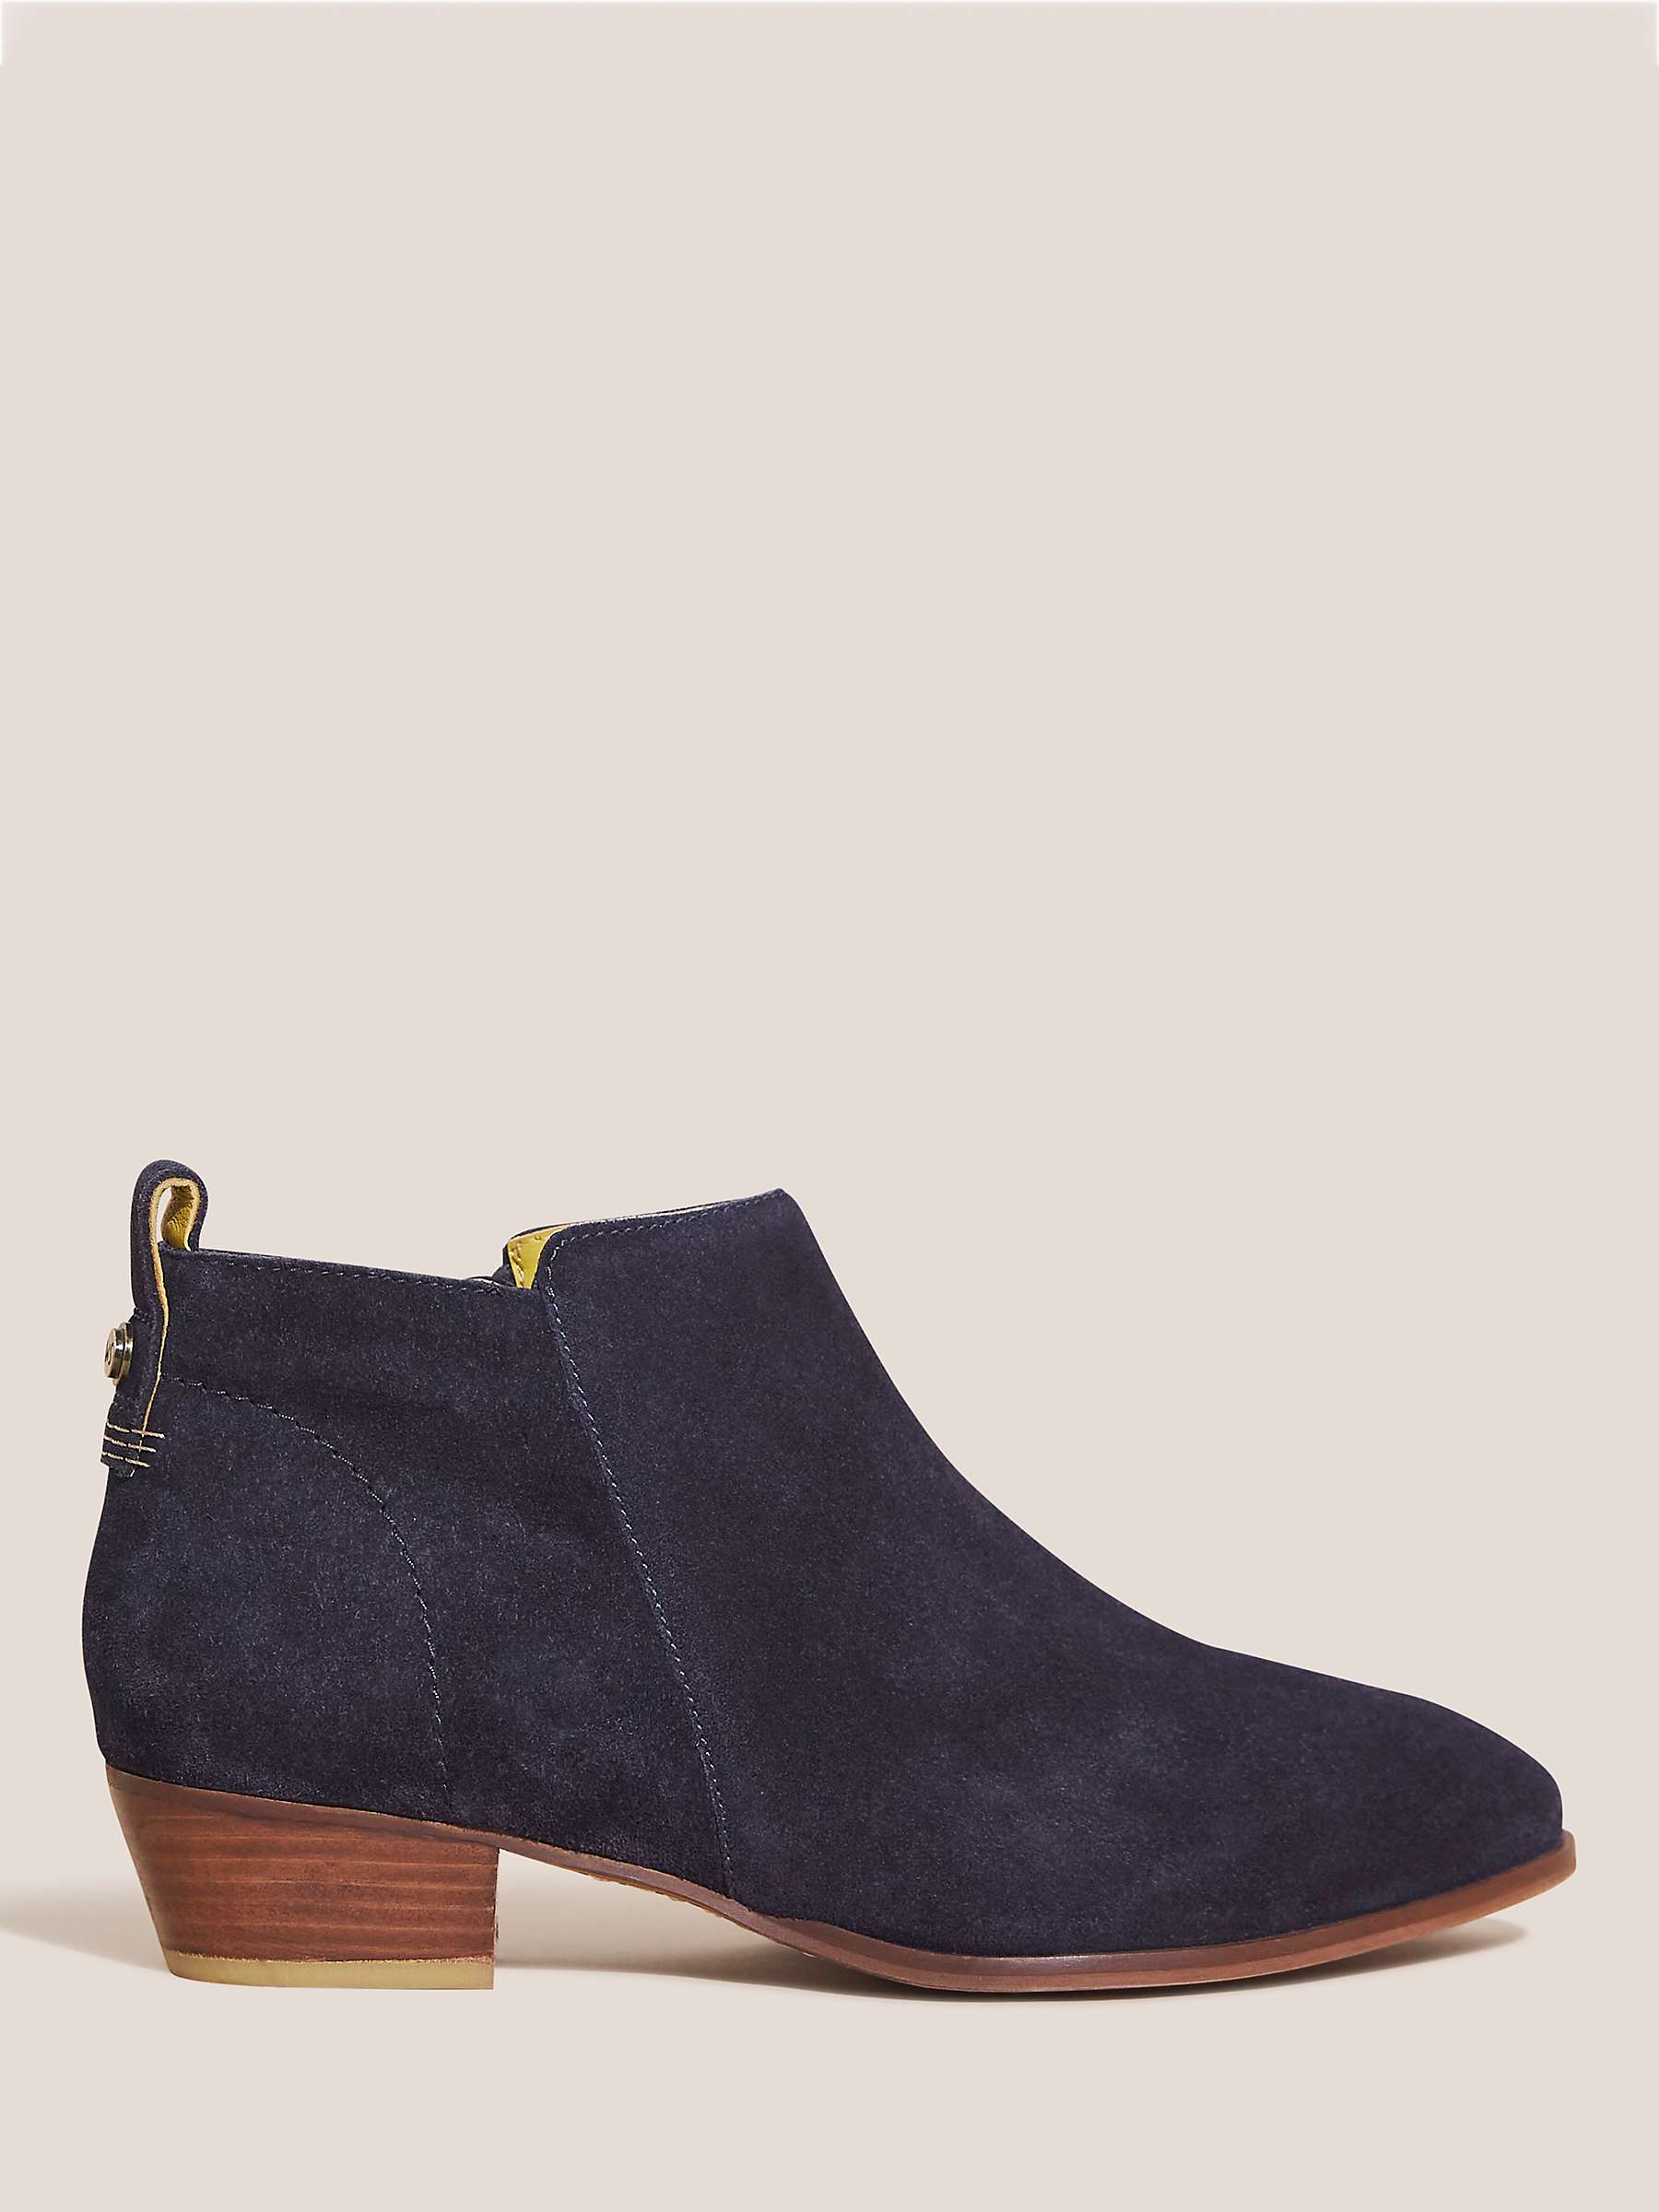 Buy White Stuff Suede Ankle Boots Online at johnlewis.com